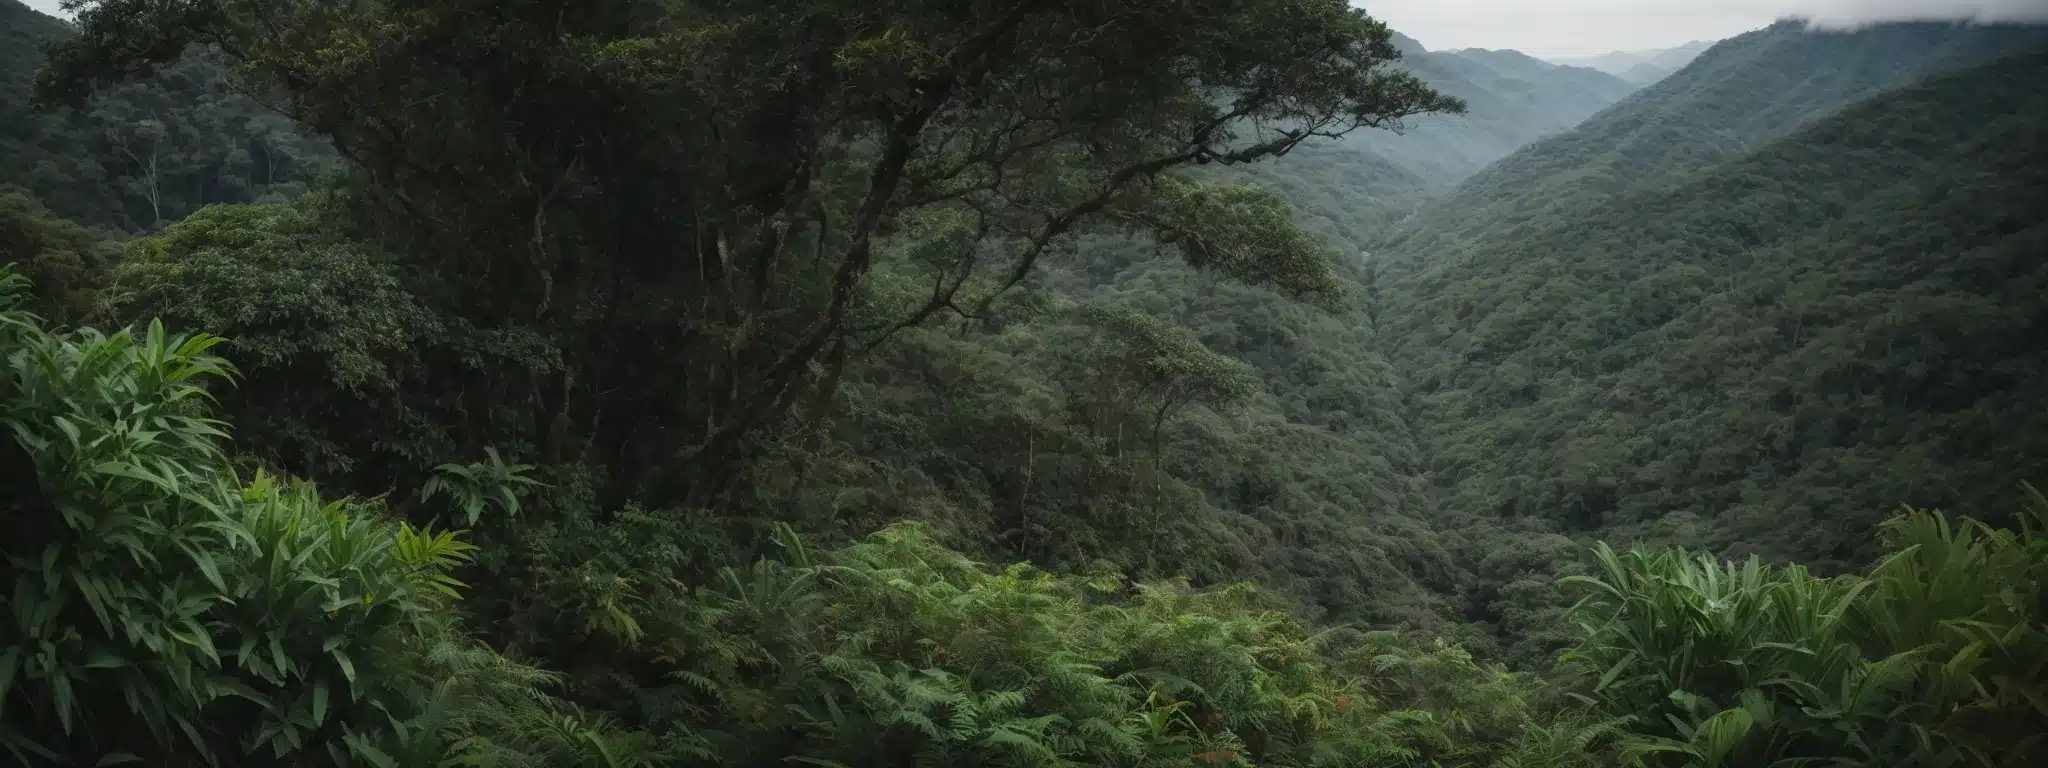 A Hiker Stands At The Edge Of A Lush Jungle, Ready To Trail-Blaze A Path Into The Dense Greenery.